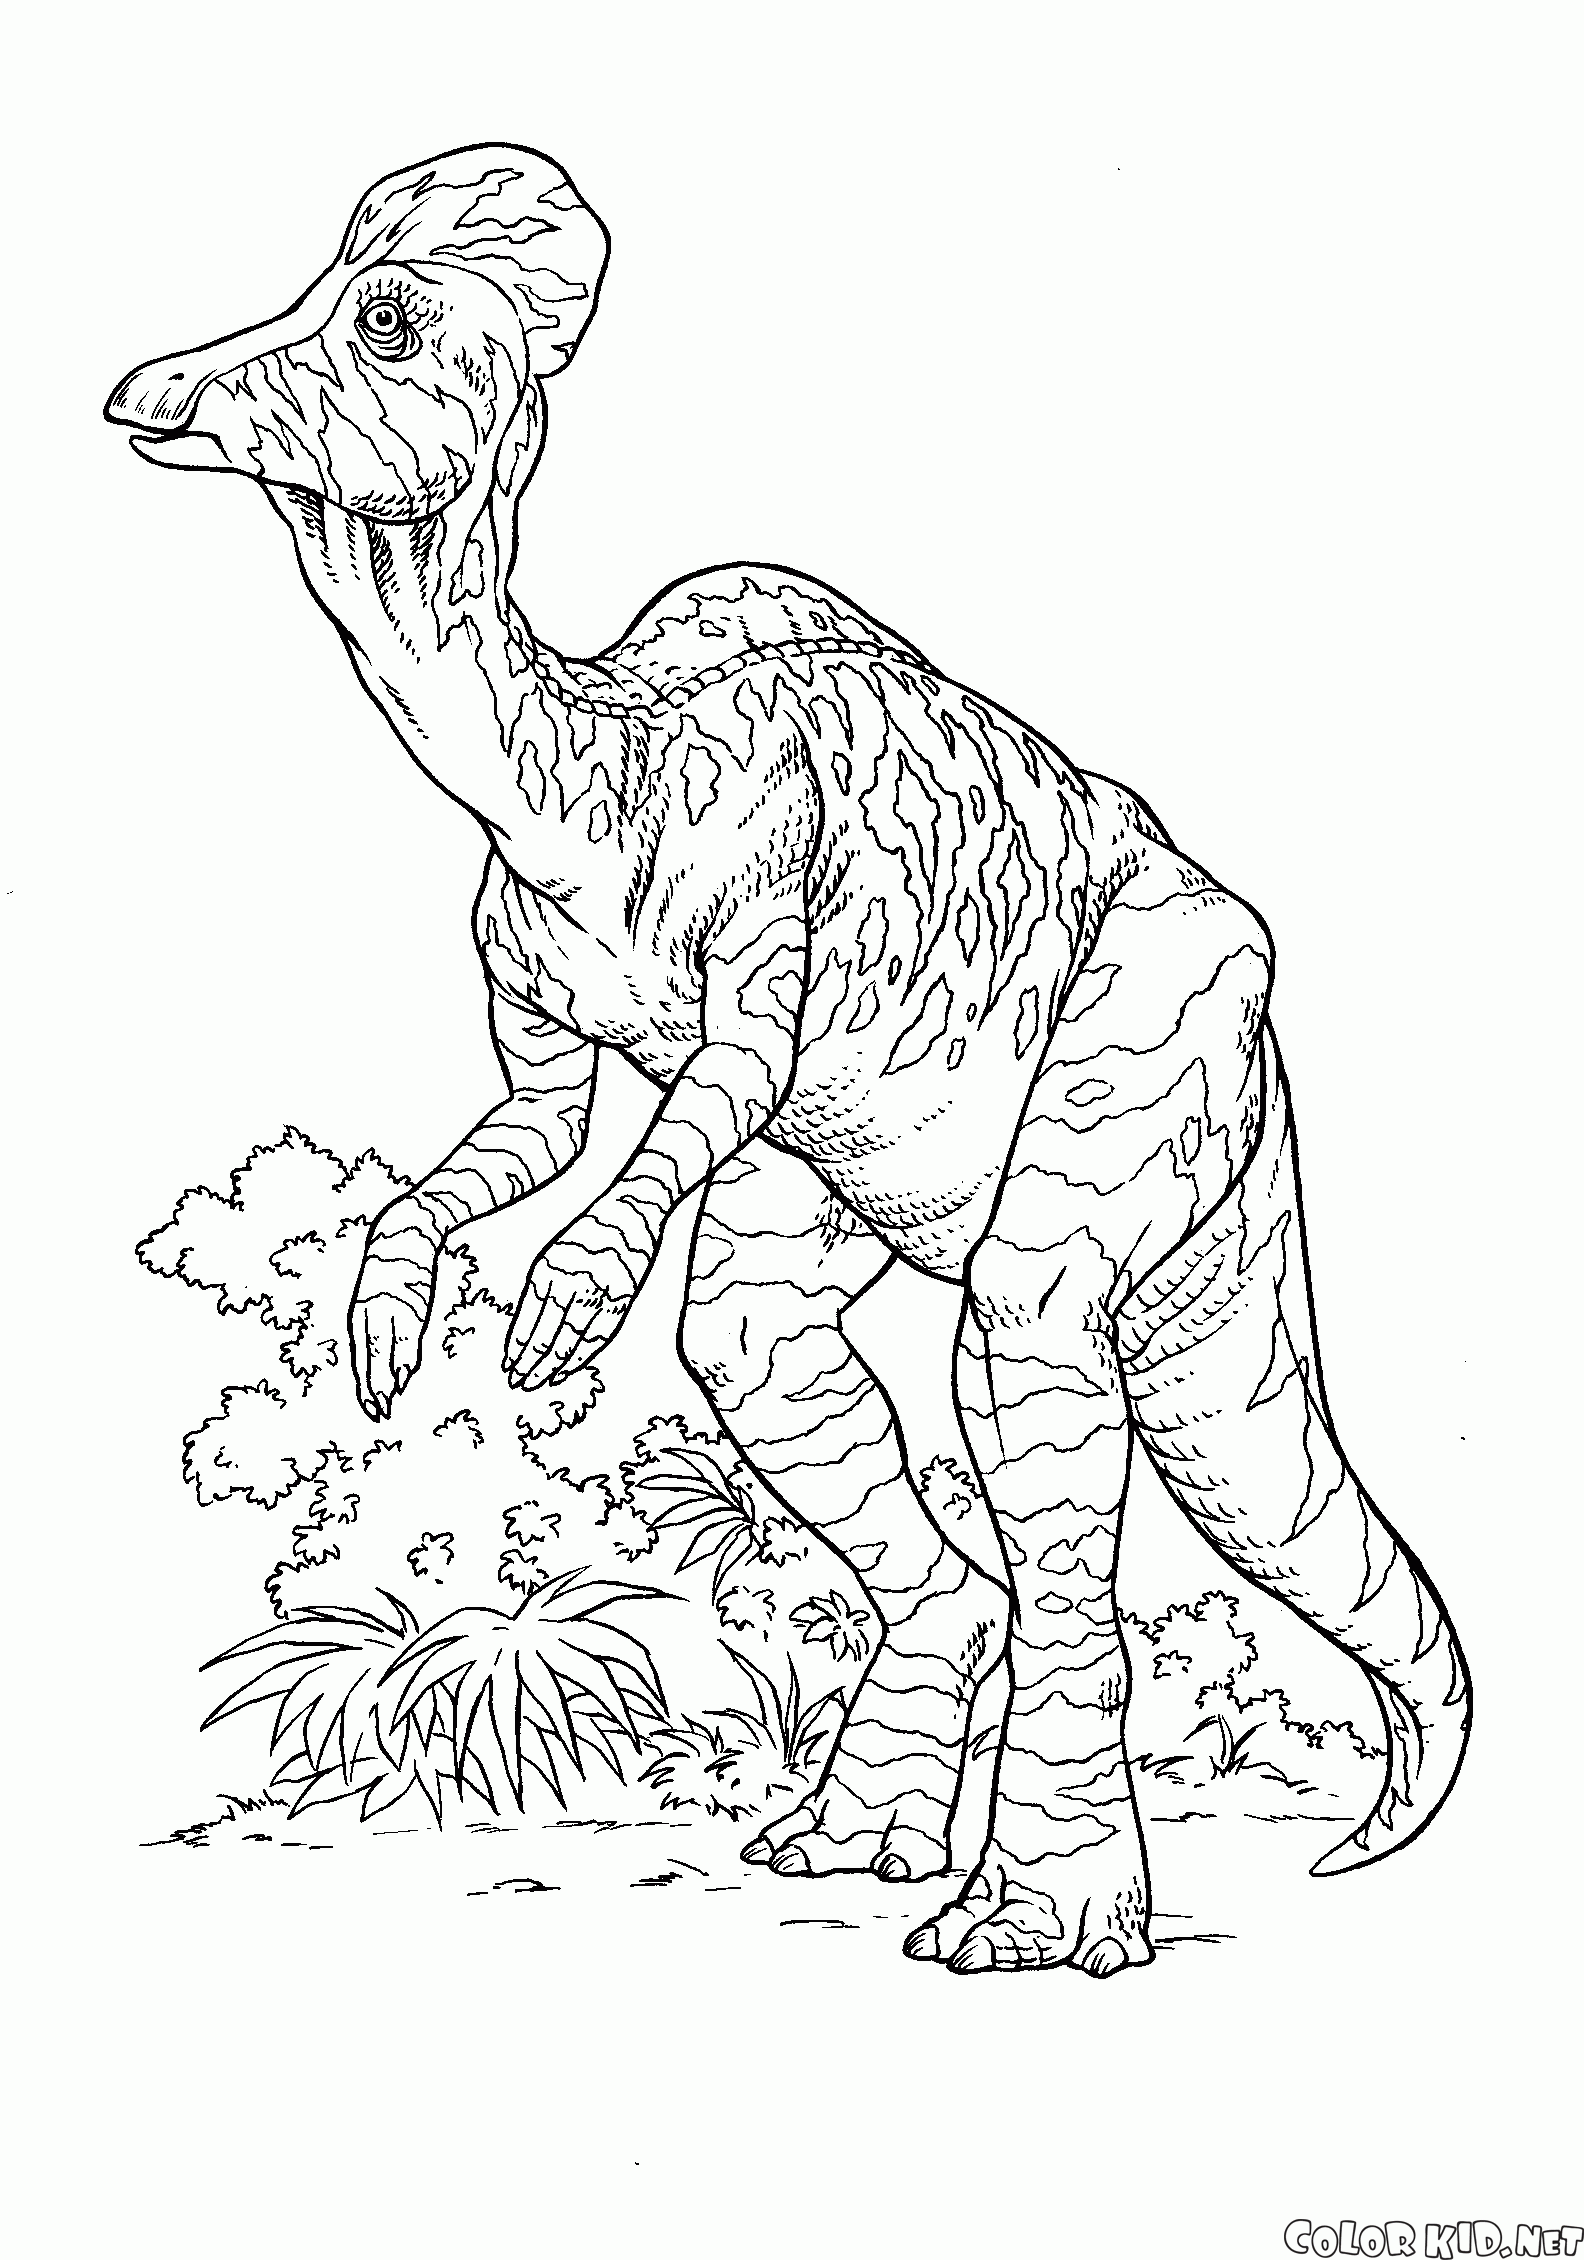 Baryonyx Coloring Pages - Free Coloring Pages